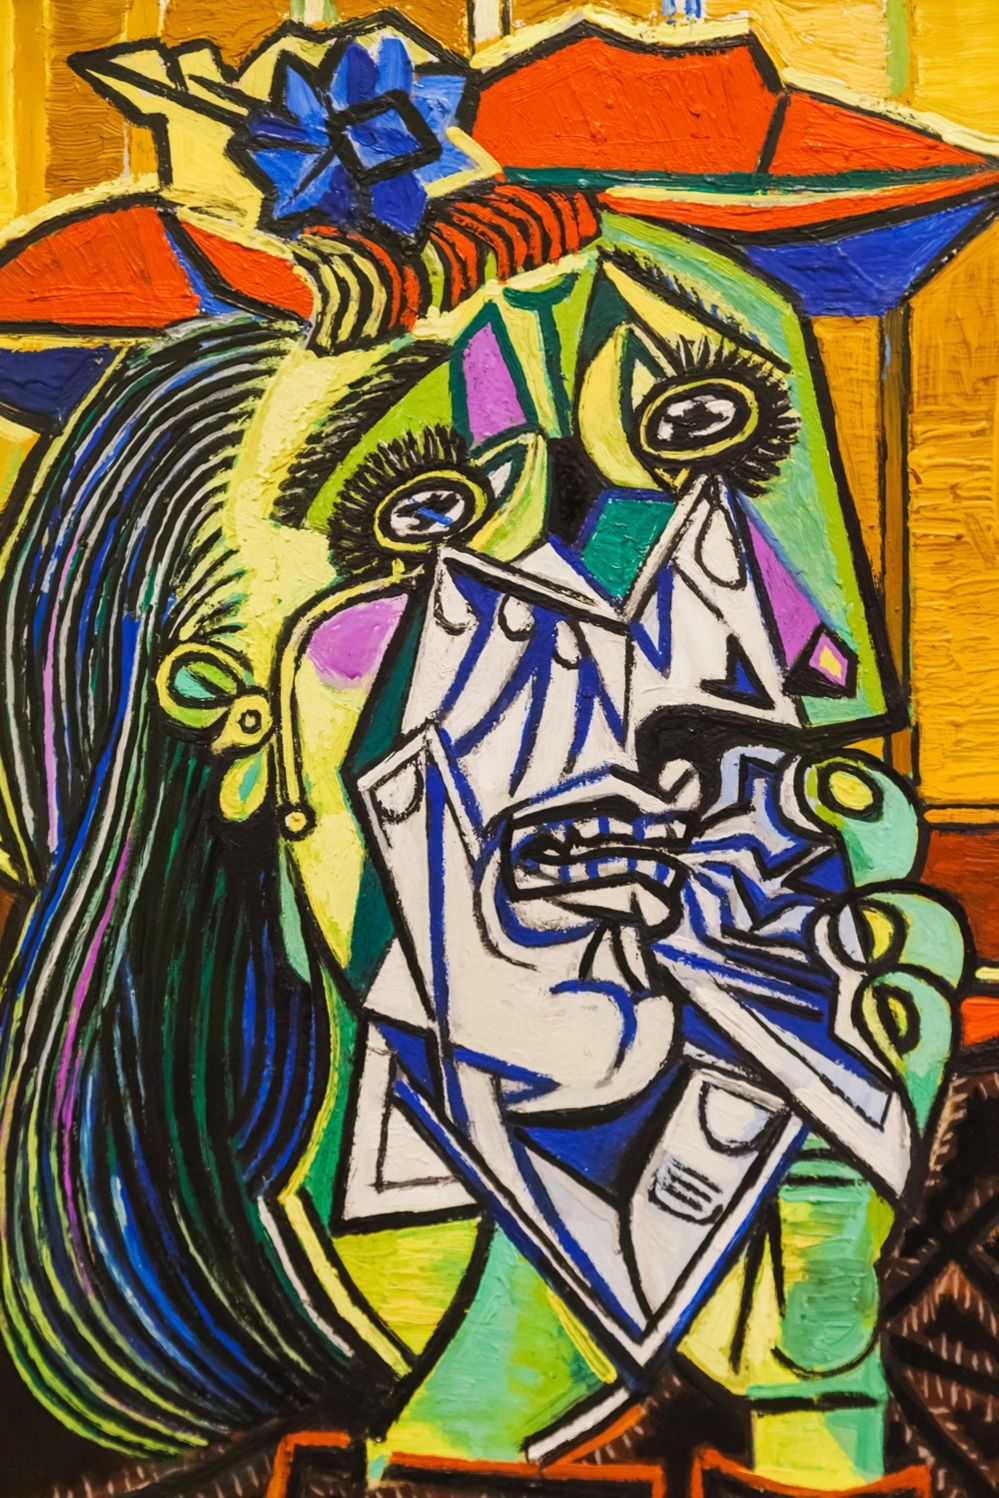 Weeping Woman (1937), a painting by Picasso